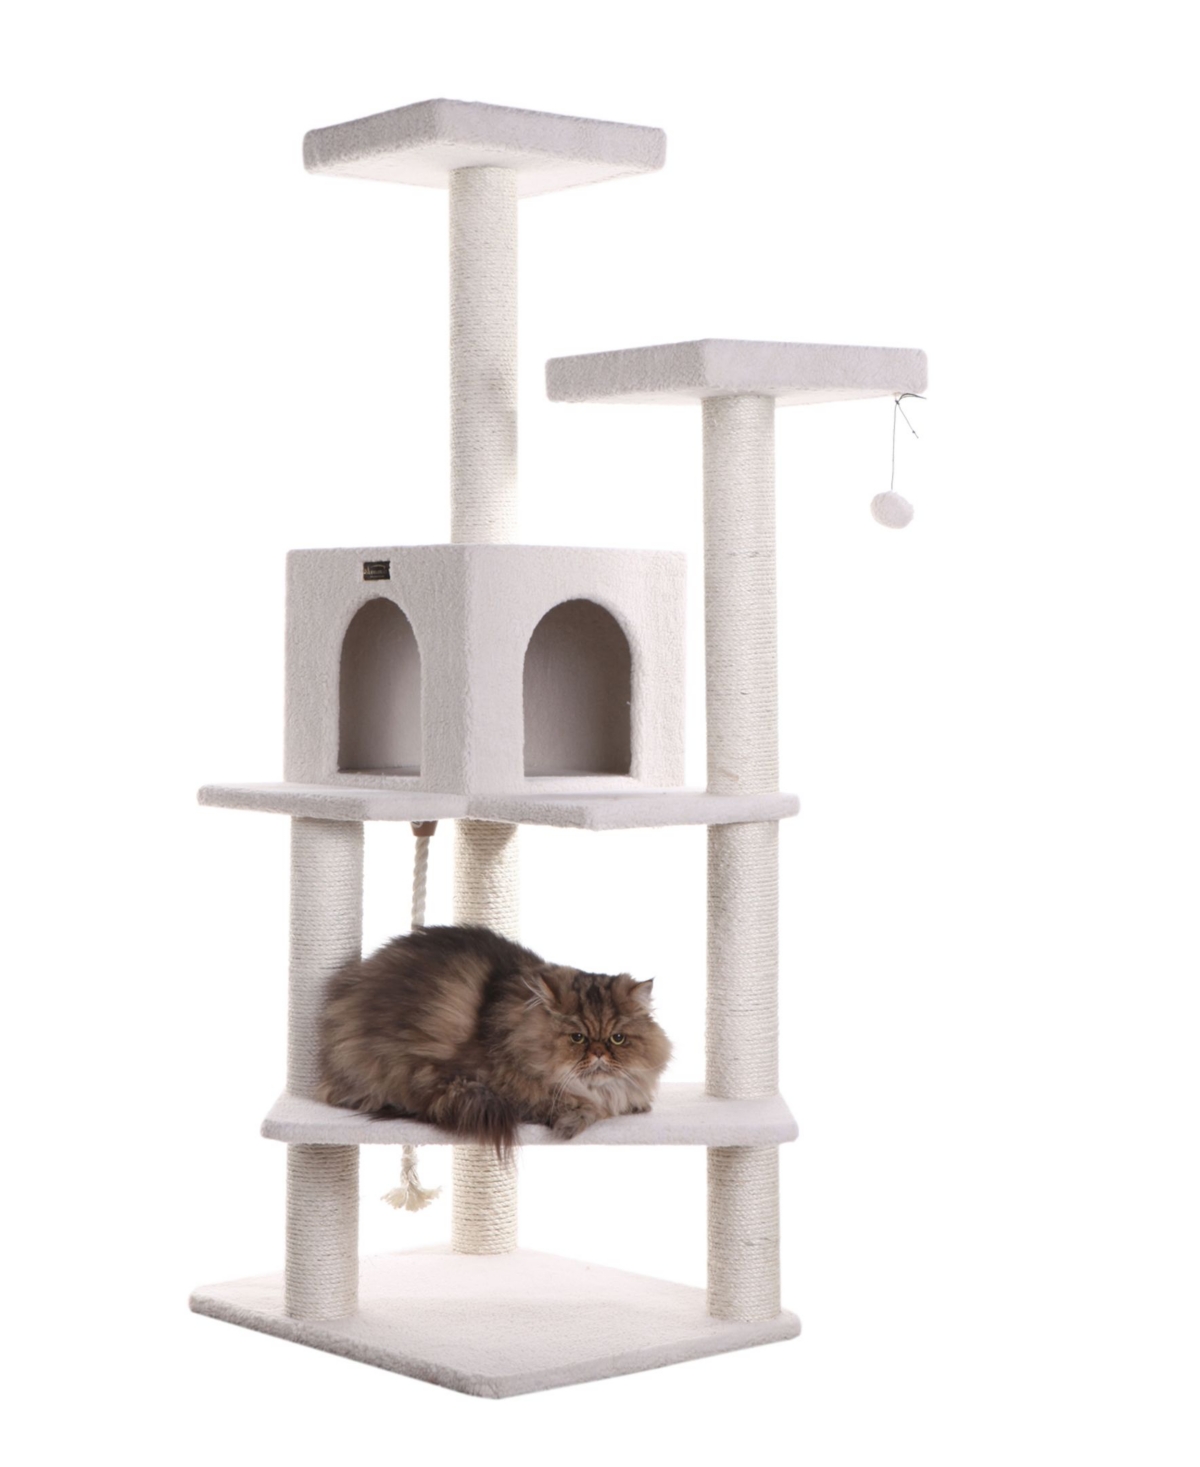 57" High Real Wood Cat Tree, Fleece Covered Cat Climber - Ivory